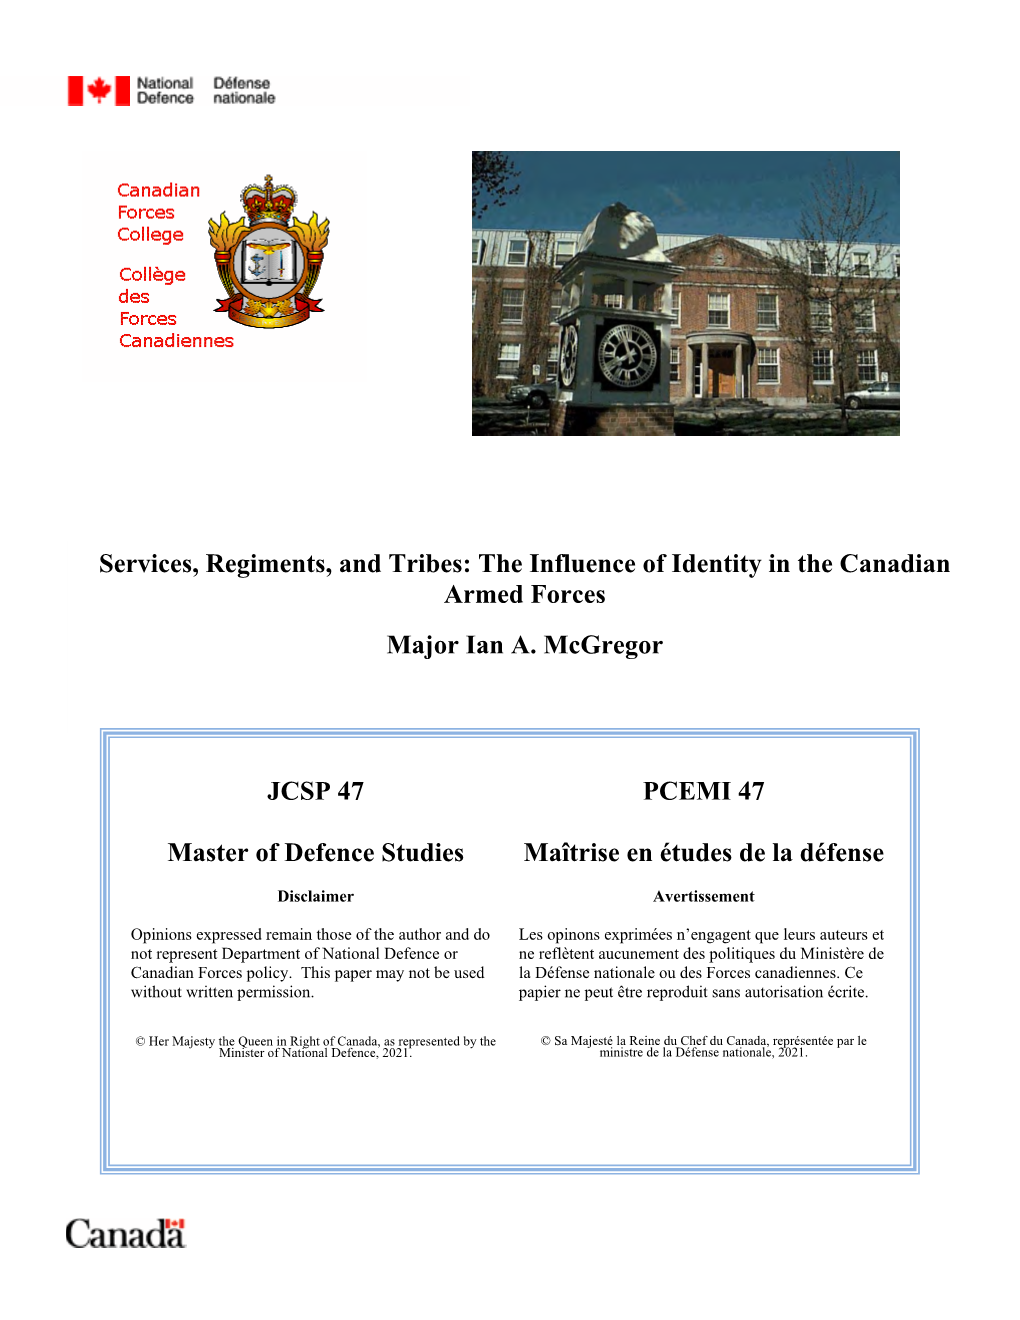 The Influence of Identity in the Canadian Armed Forces Major Ian A